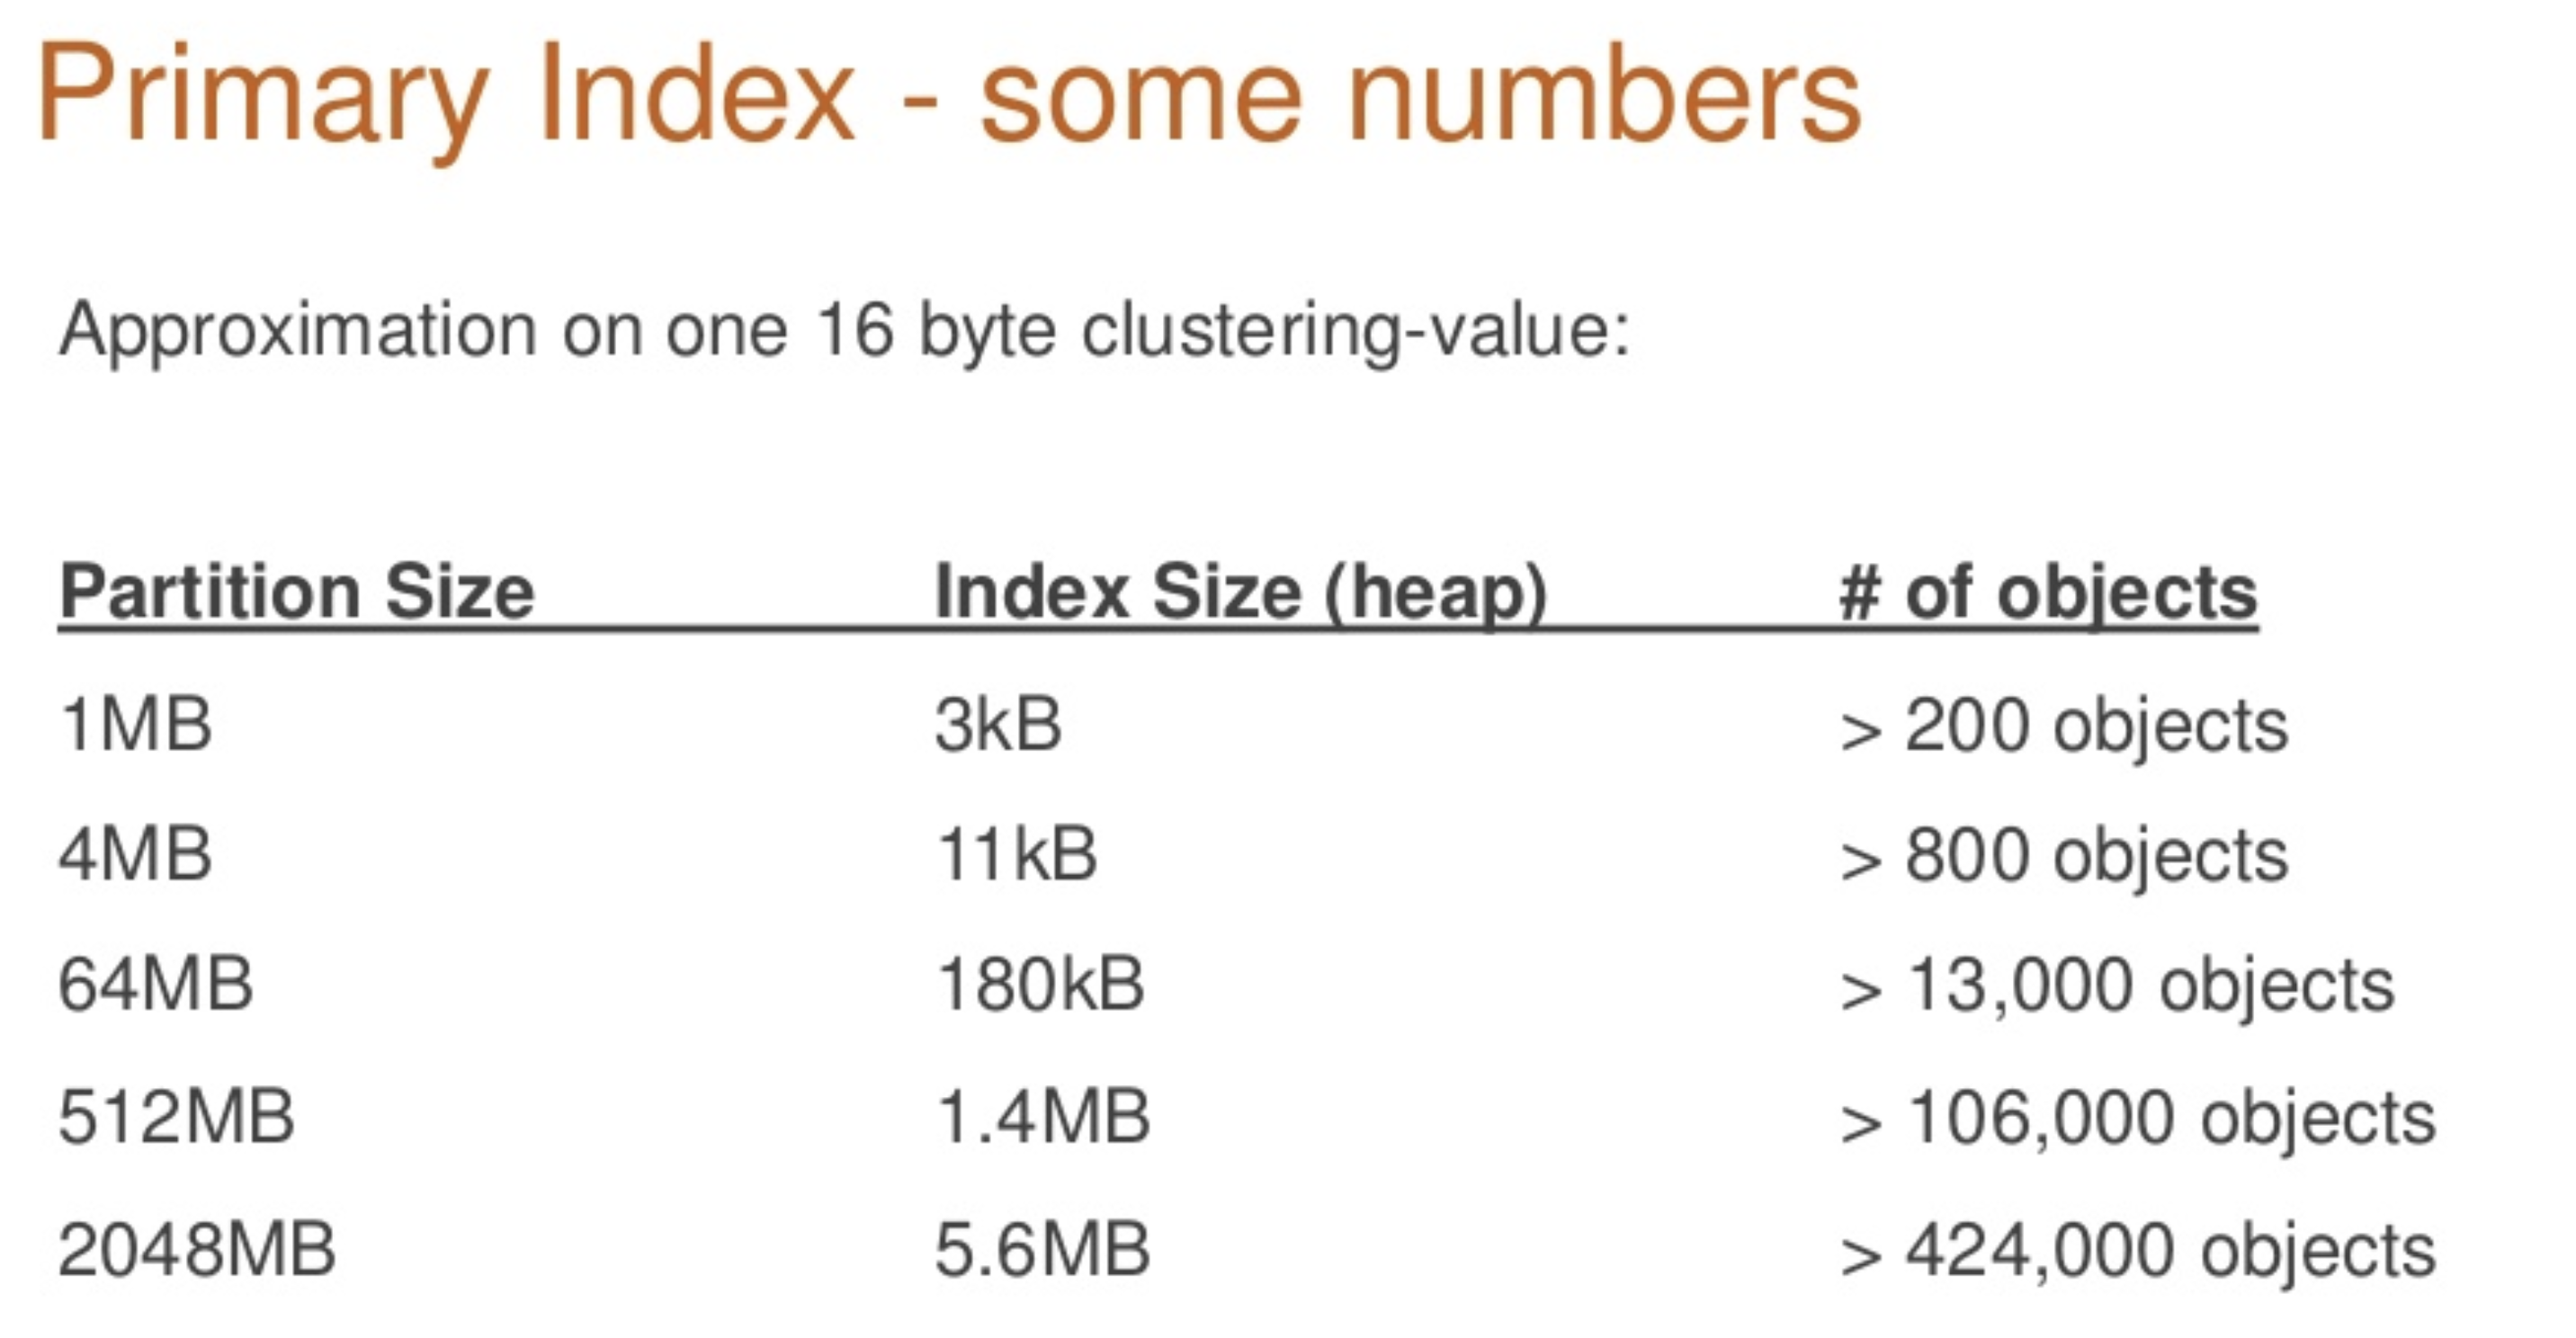 IndexInfo numbers from Robert Stupp